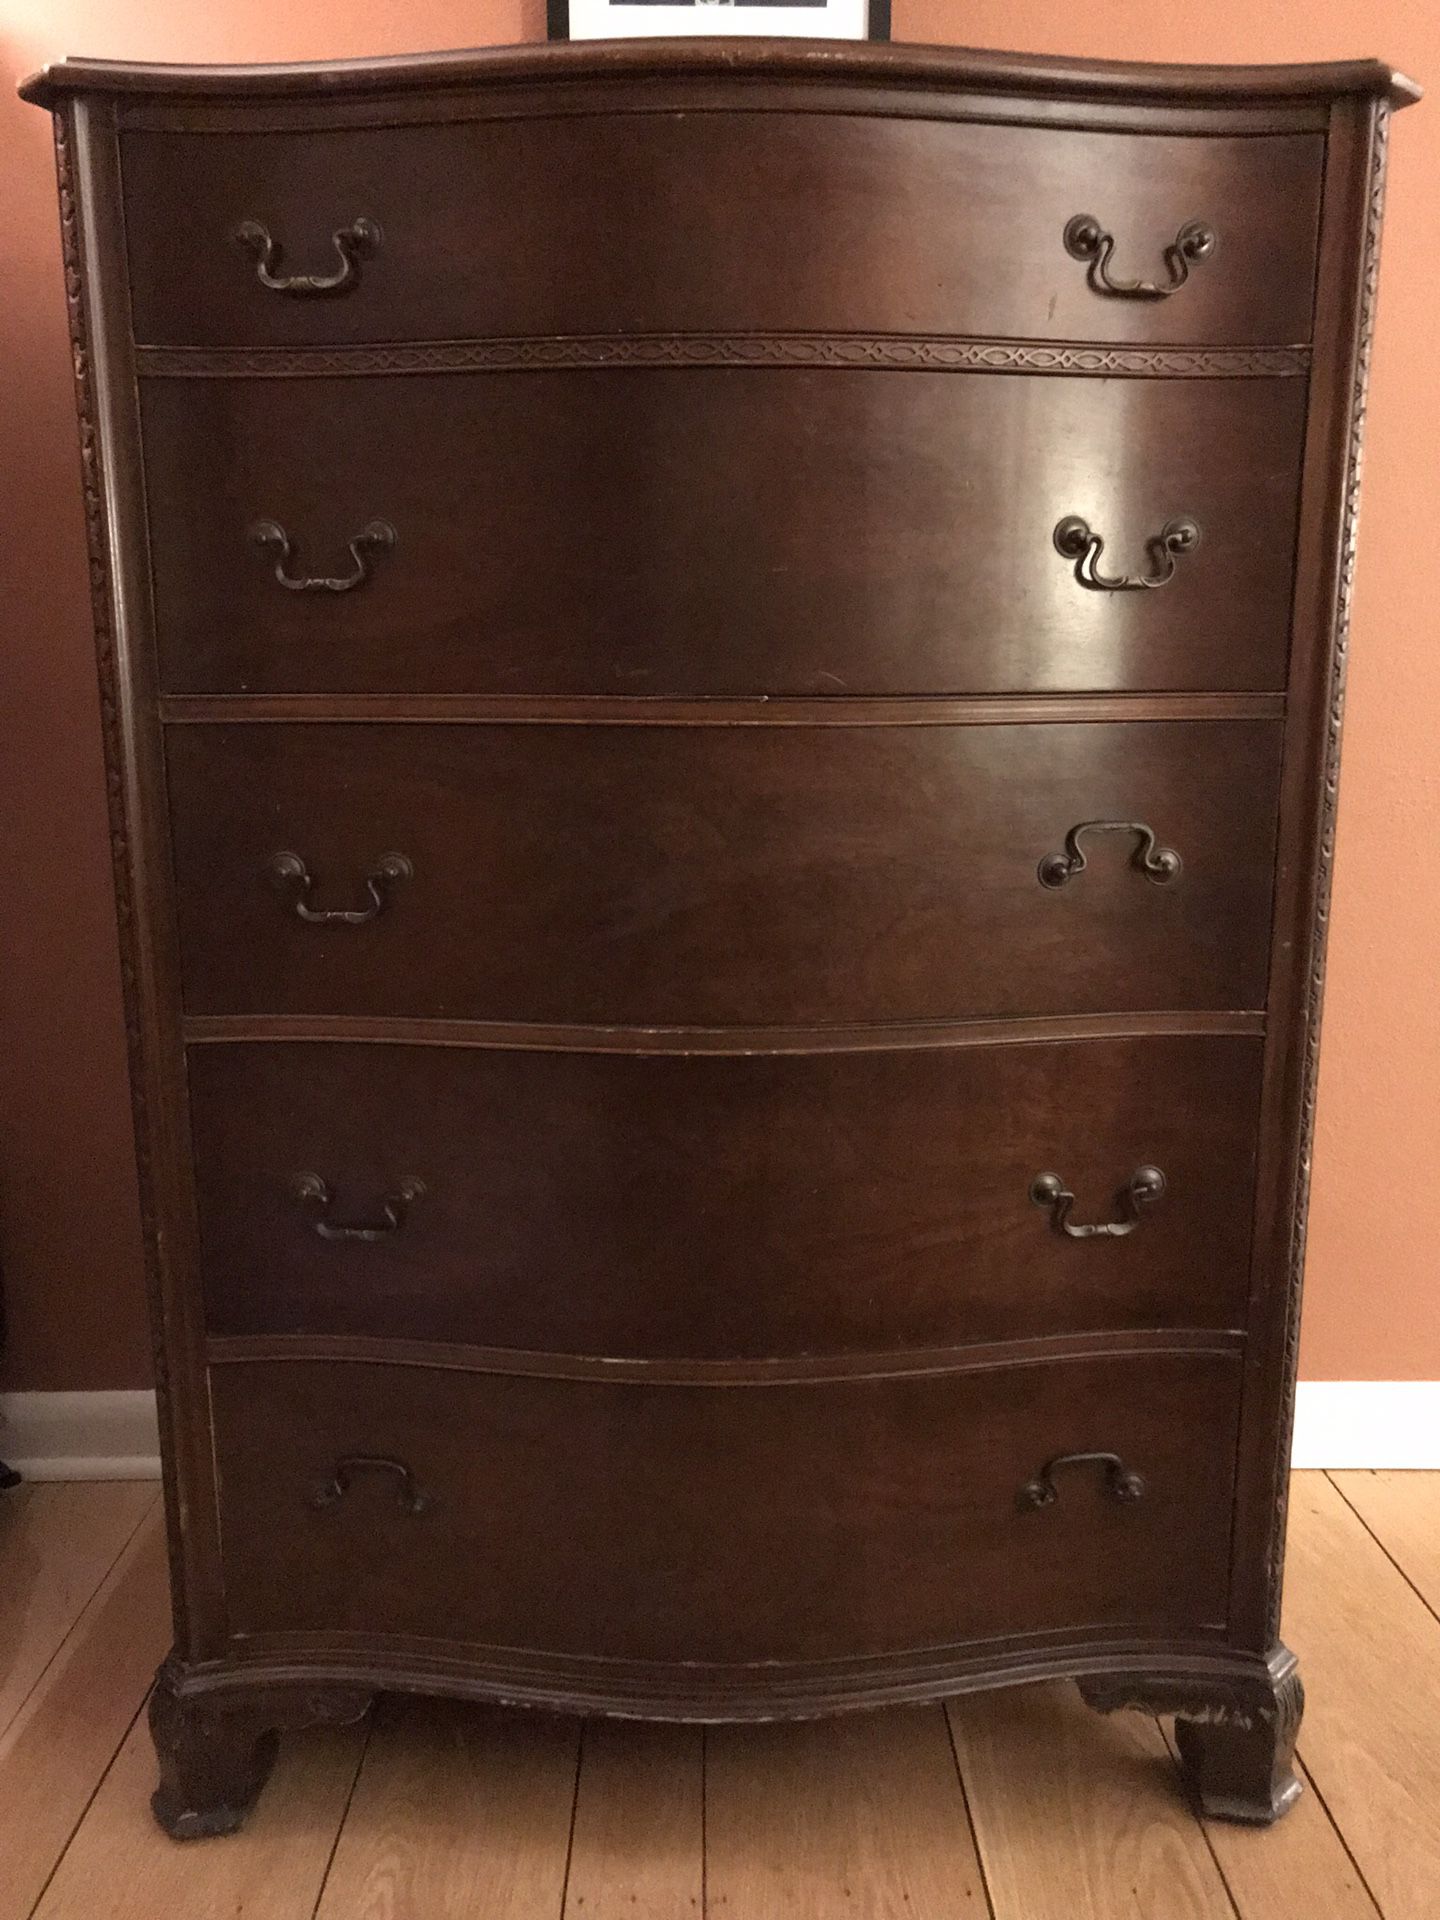 Antique, mahogany, dresser/chest of drawers